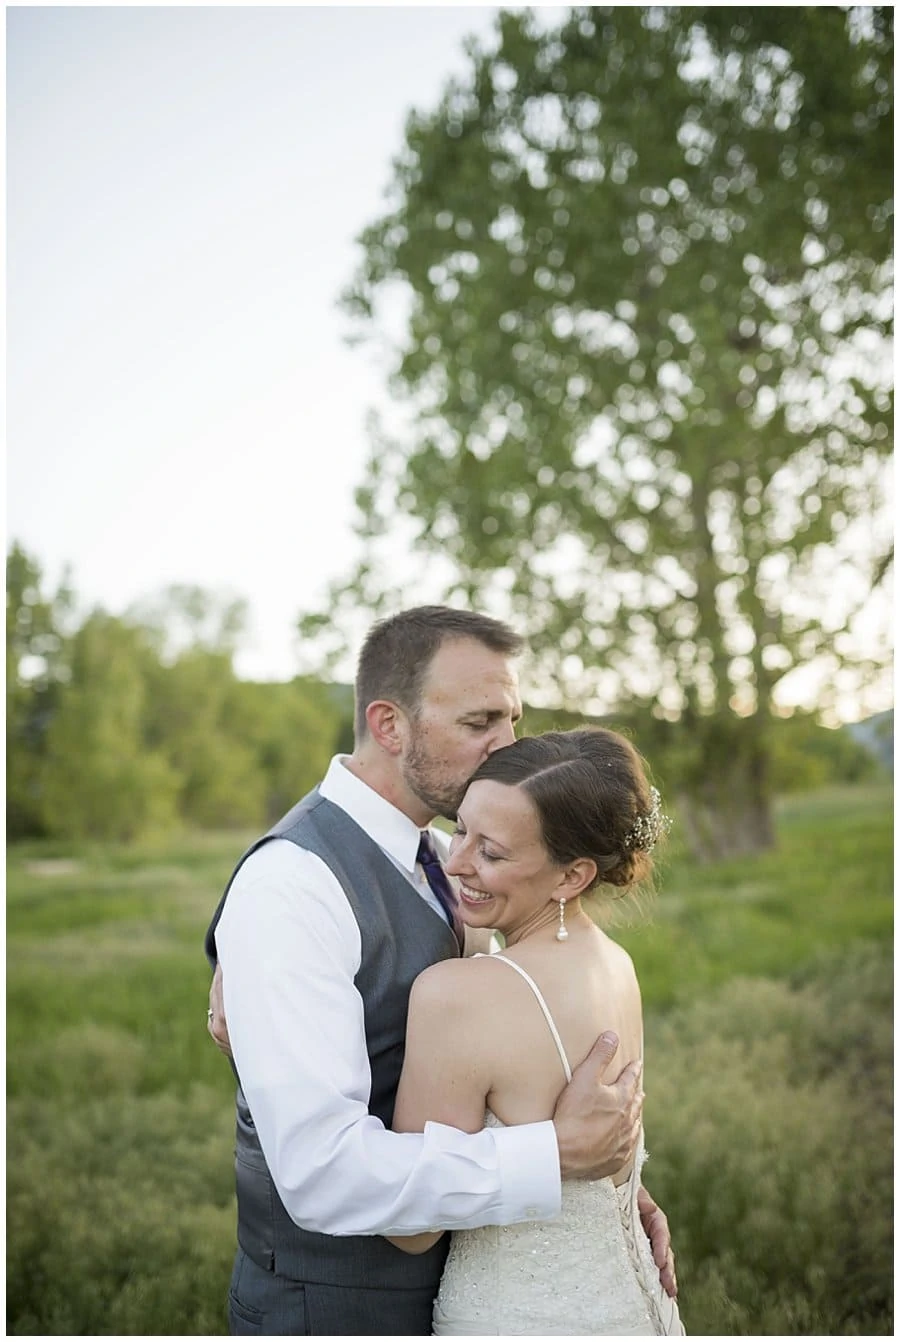 romantic sunset bride and groom portraits in field at spring Denver Botanic Gardens at Chatfield Wedding by Lyons wedding photographer Jennie Crate